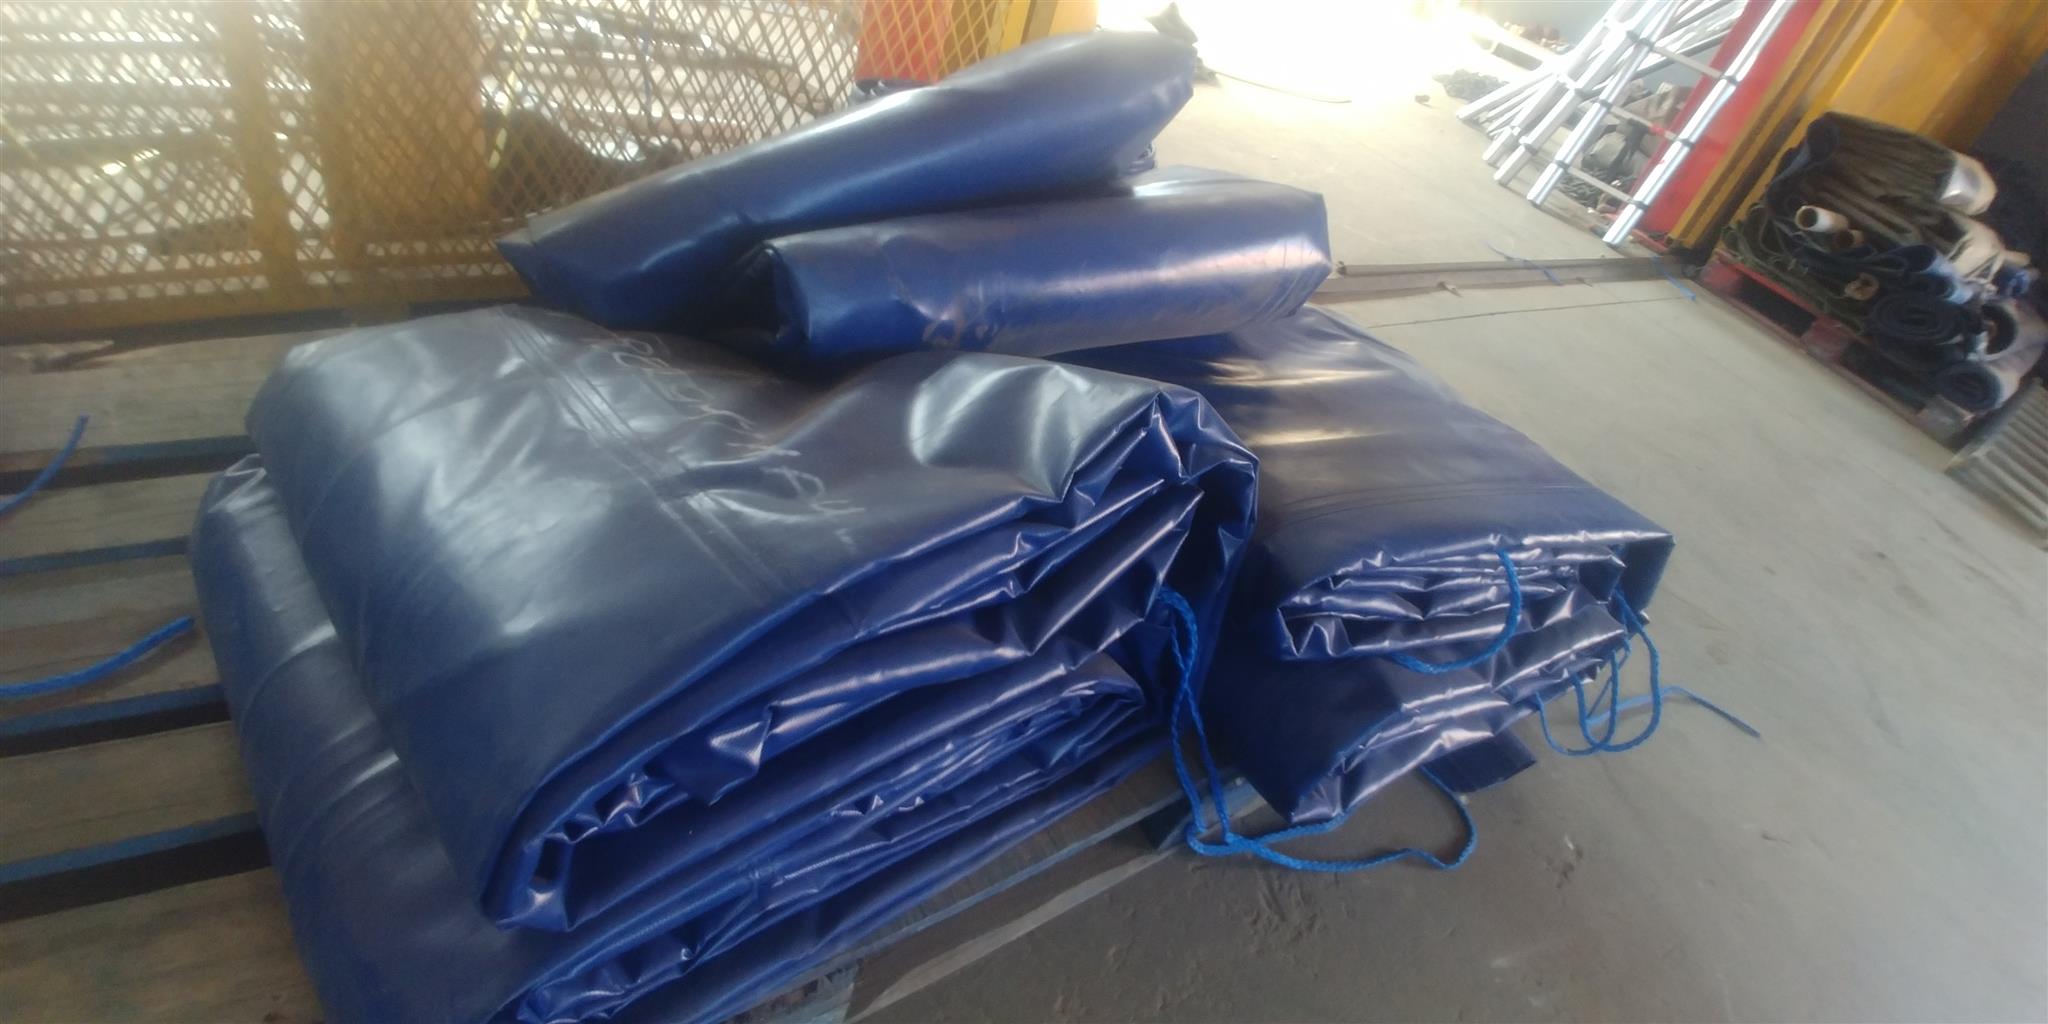 9m x 9m heavy duty truck covers/tarpaulins and cargo nets for super-link and tri_axle